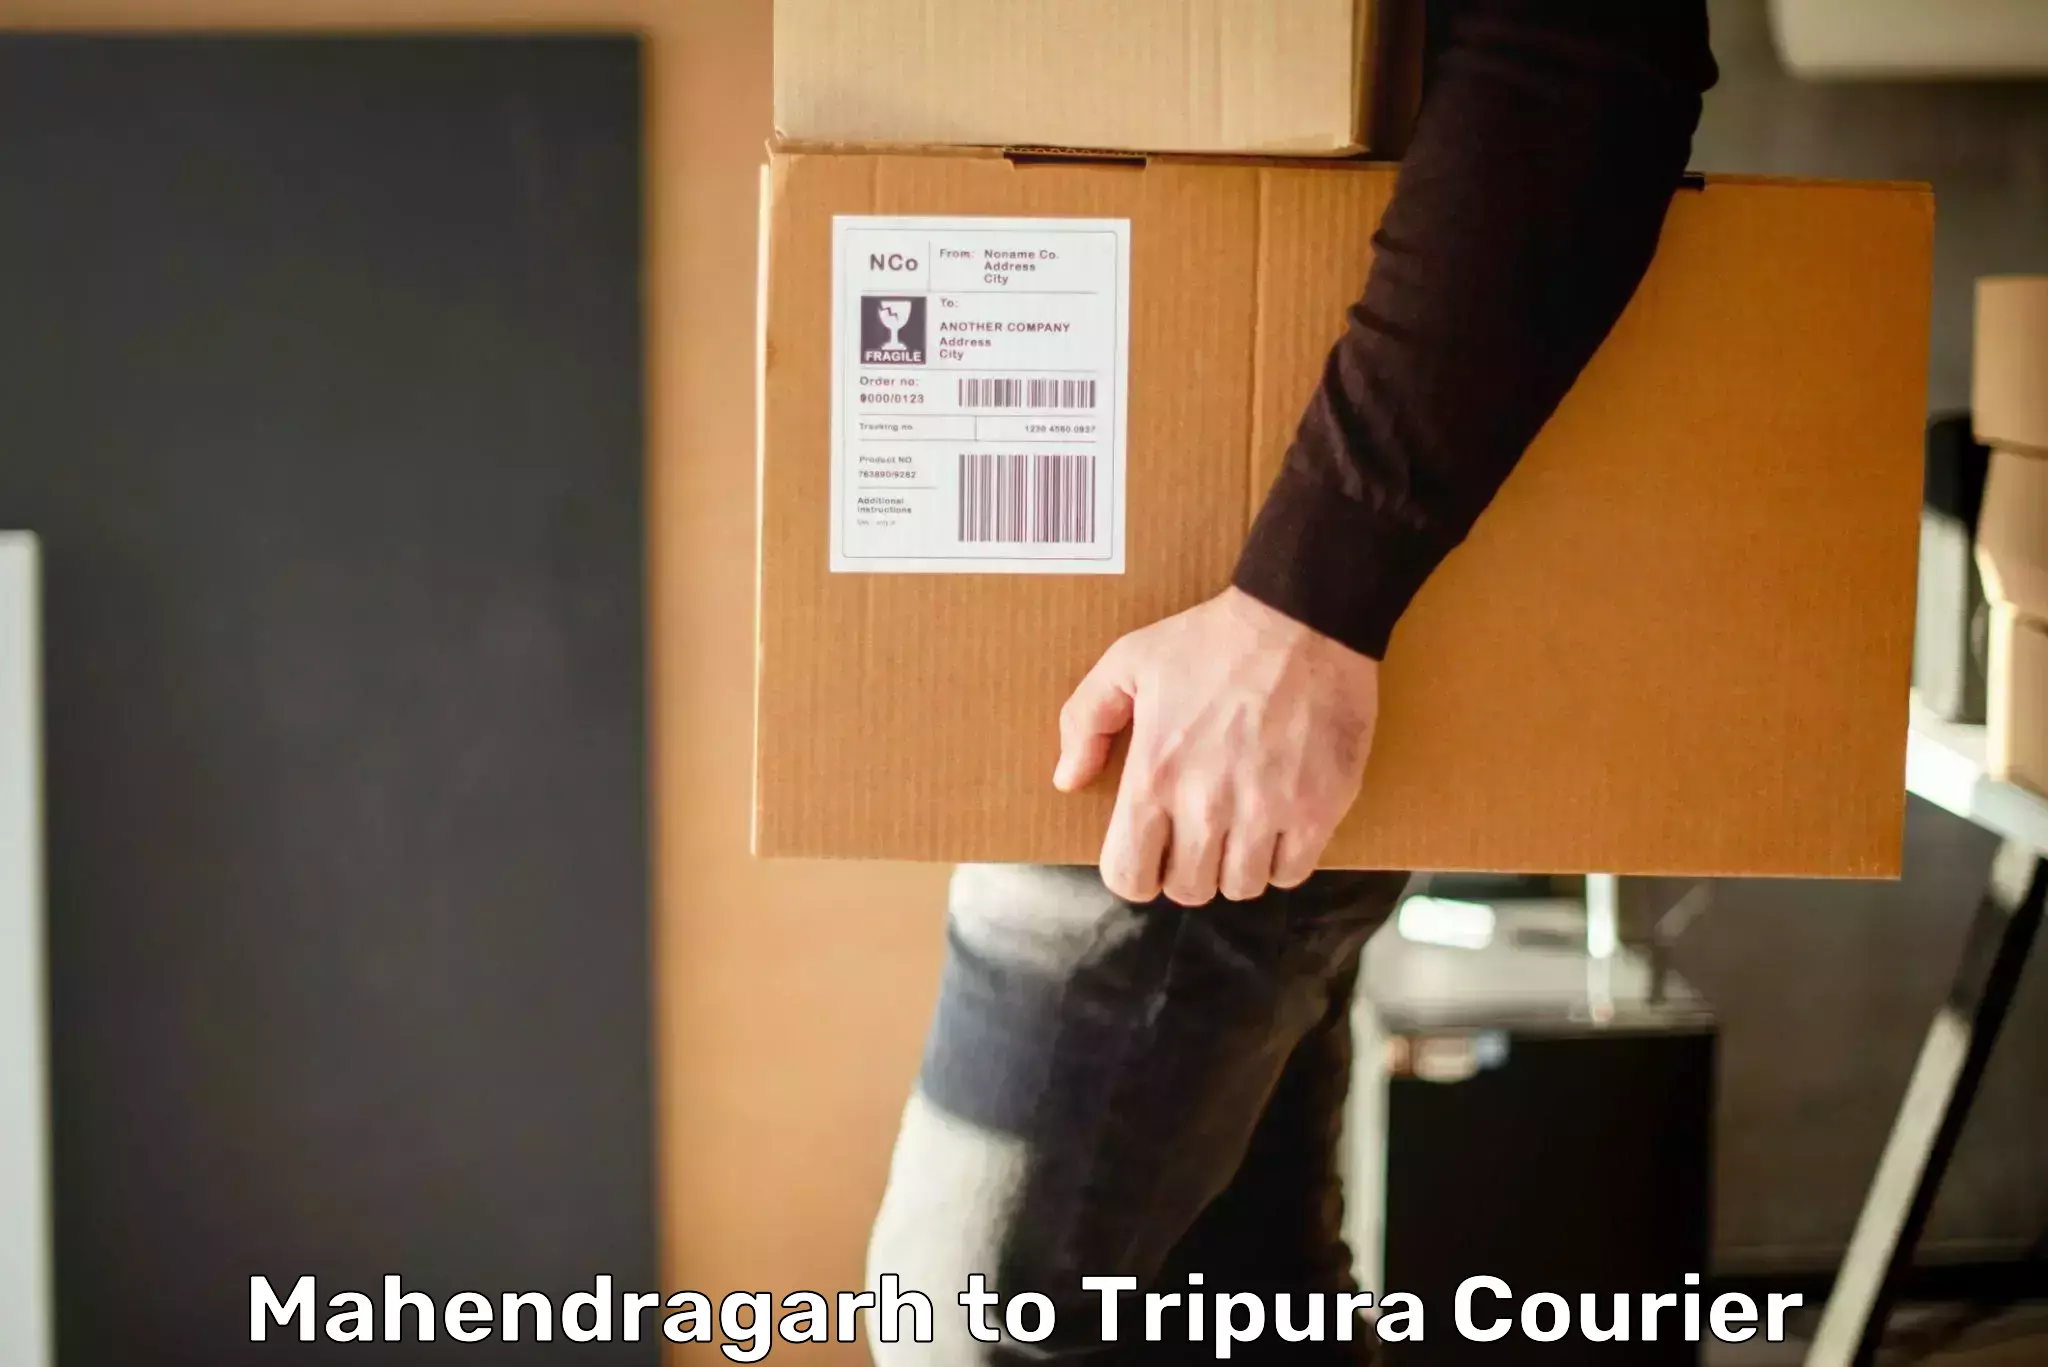 Small parcel delivery Mahendragarh to Udaipur Tripura